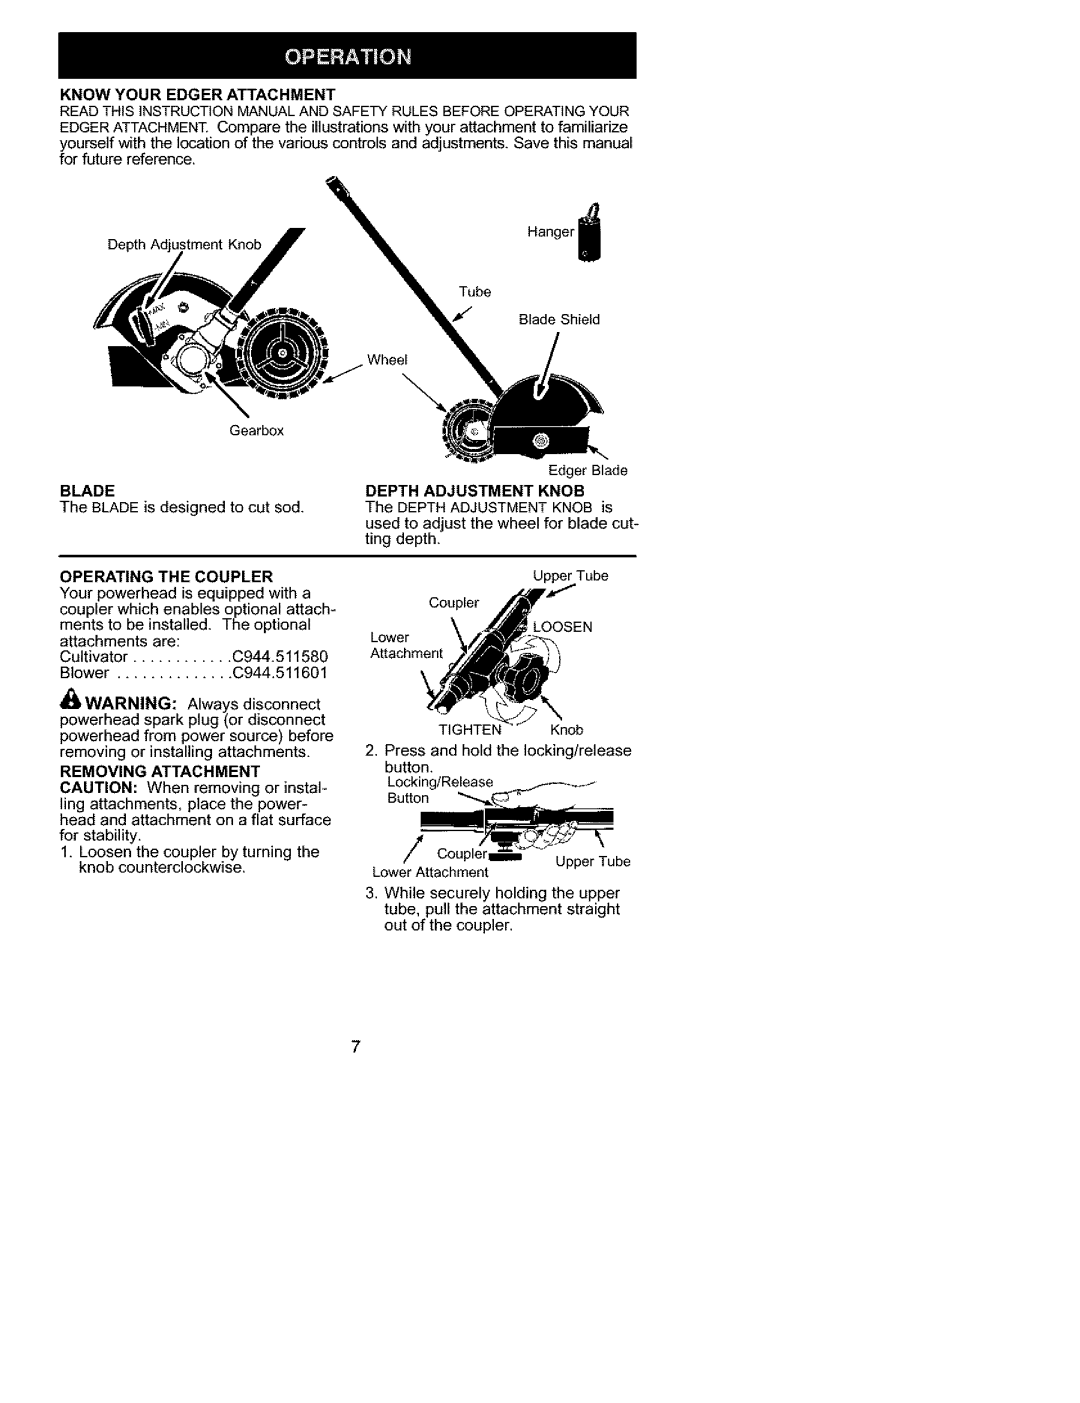 Craftsman C944.511571 manual Know Your Edger Attachment, Operating The Coupler, Removing Attachment 